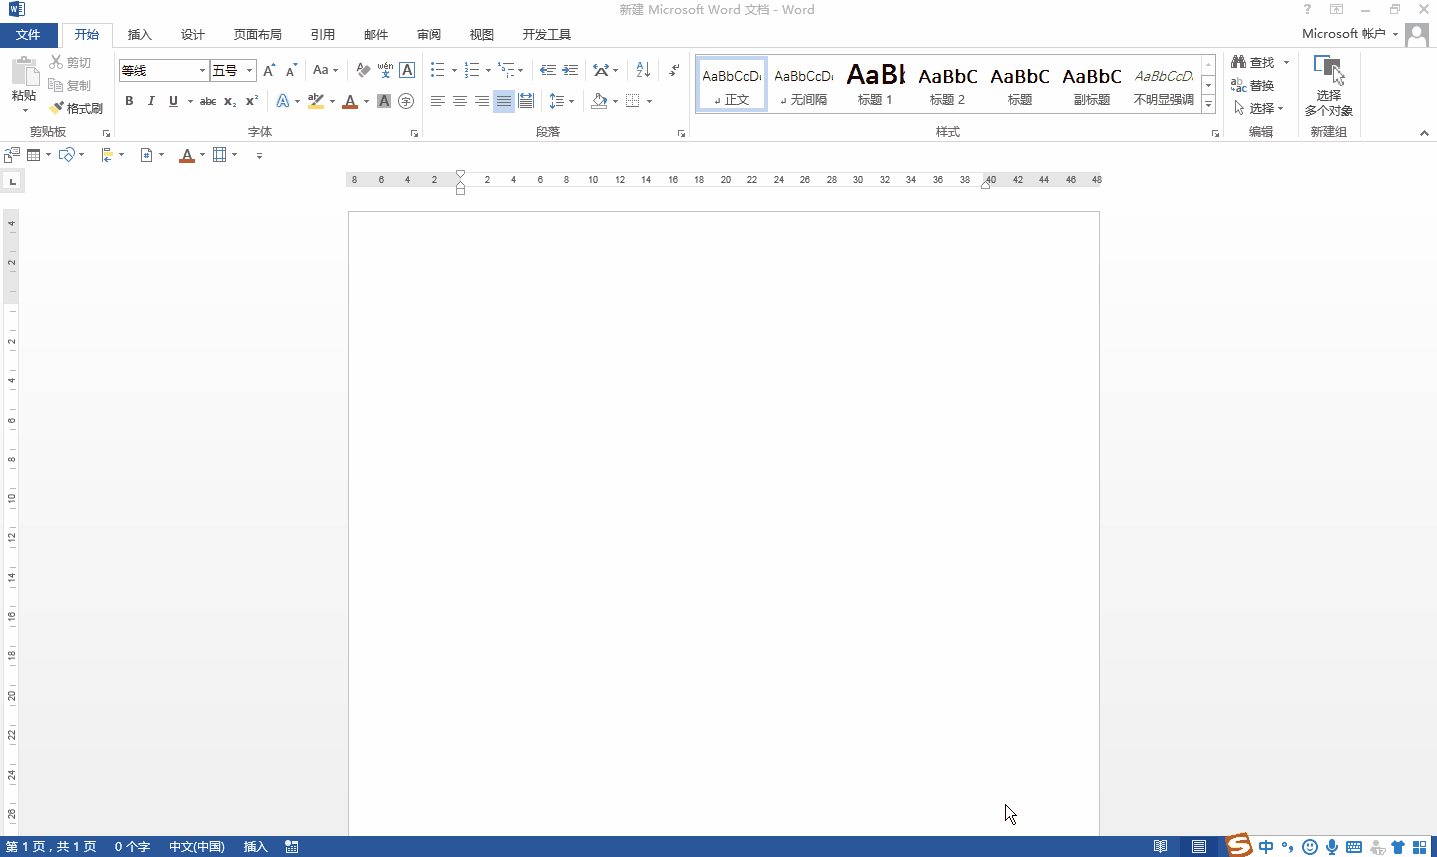 Two ways to set the default font in Word documents, allowing you to set it up once and for all